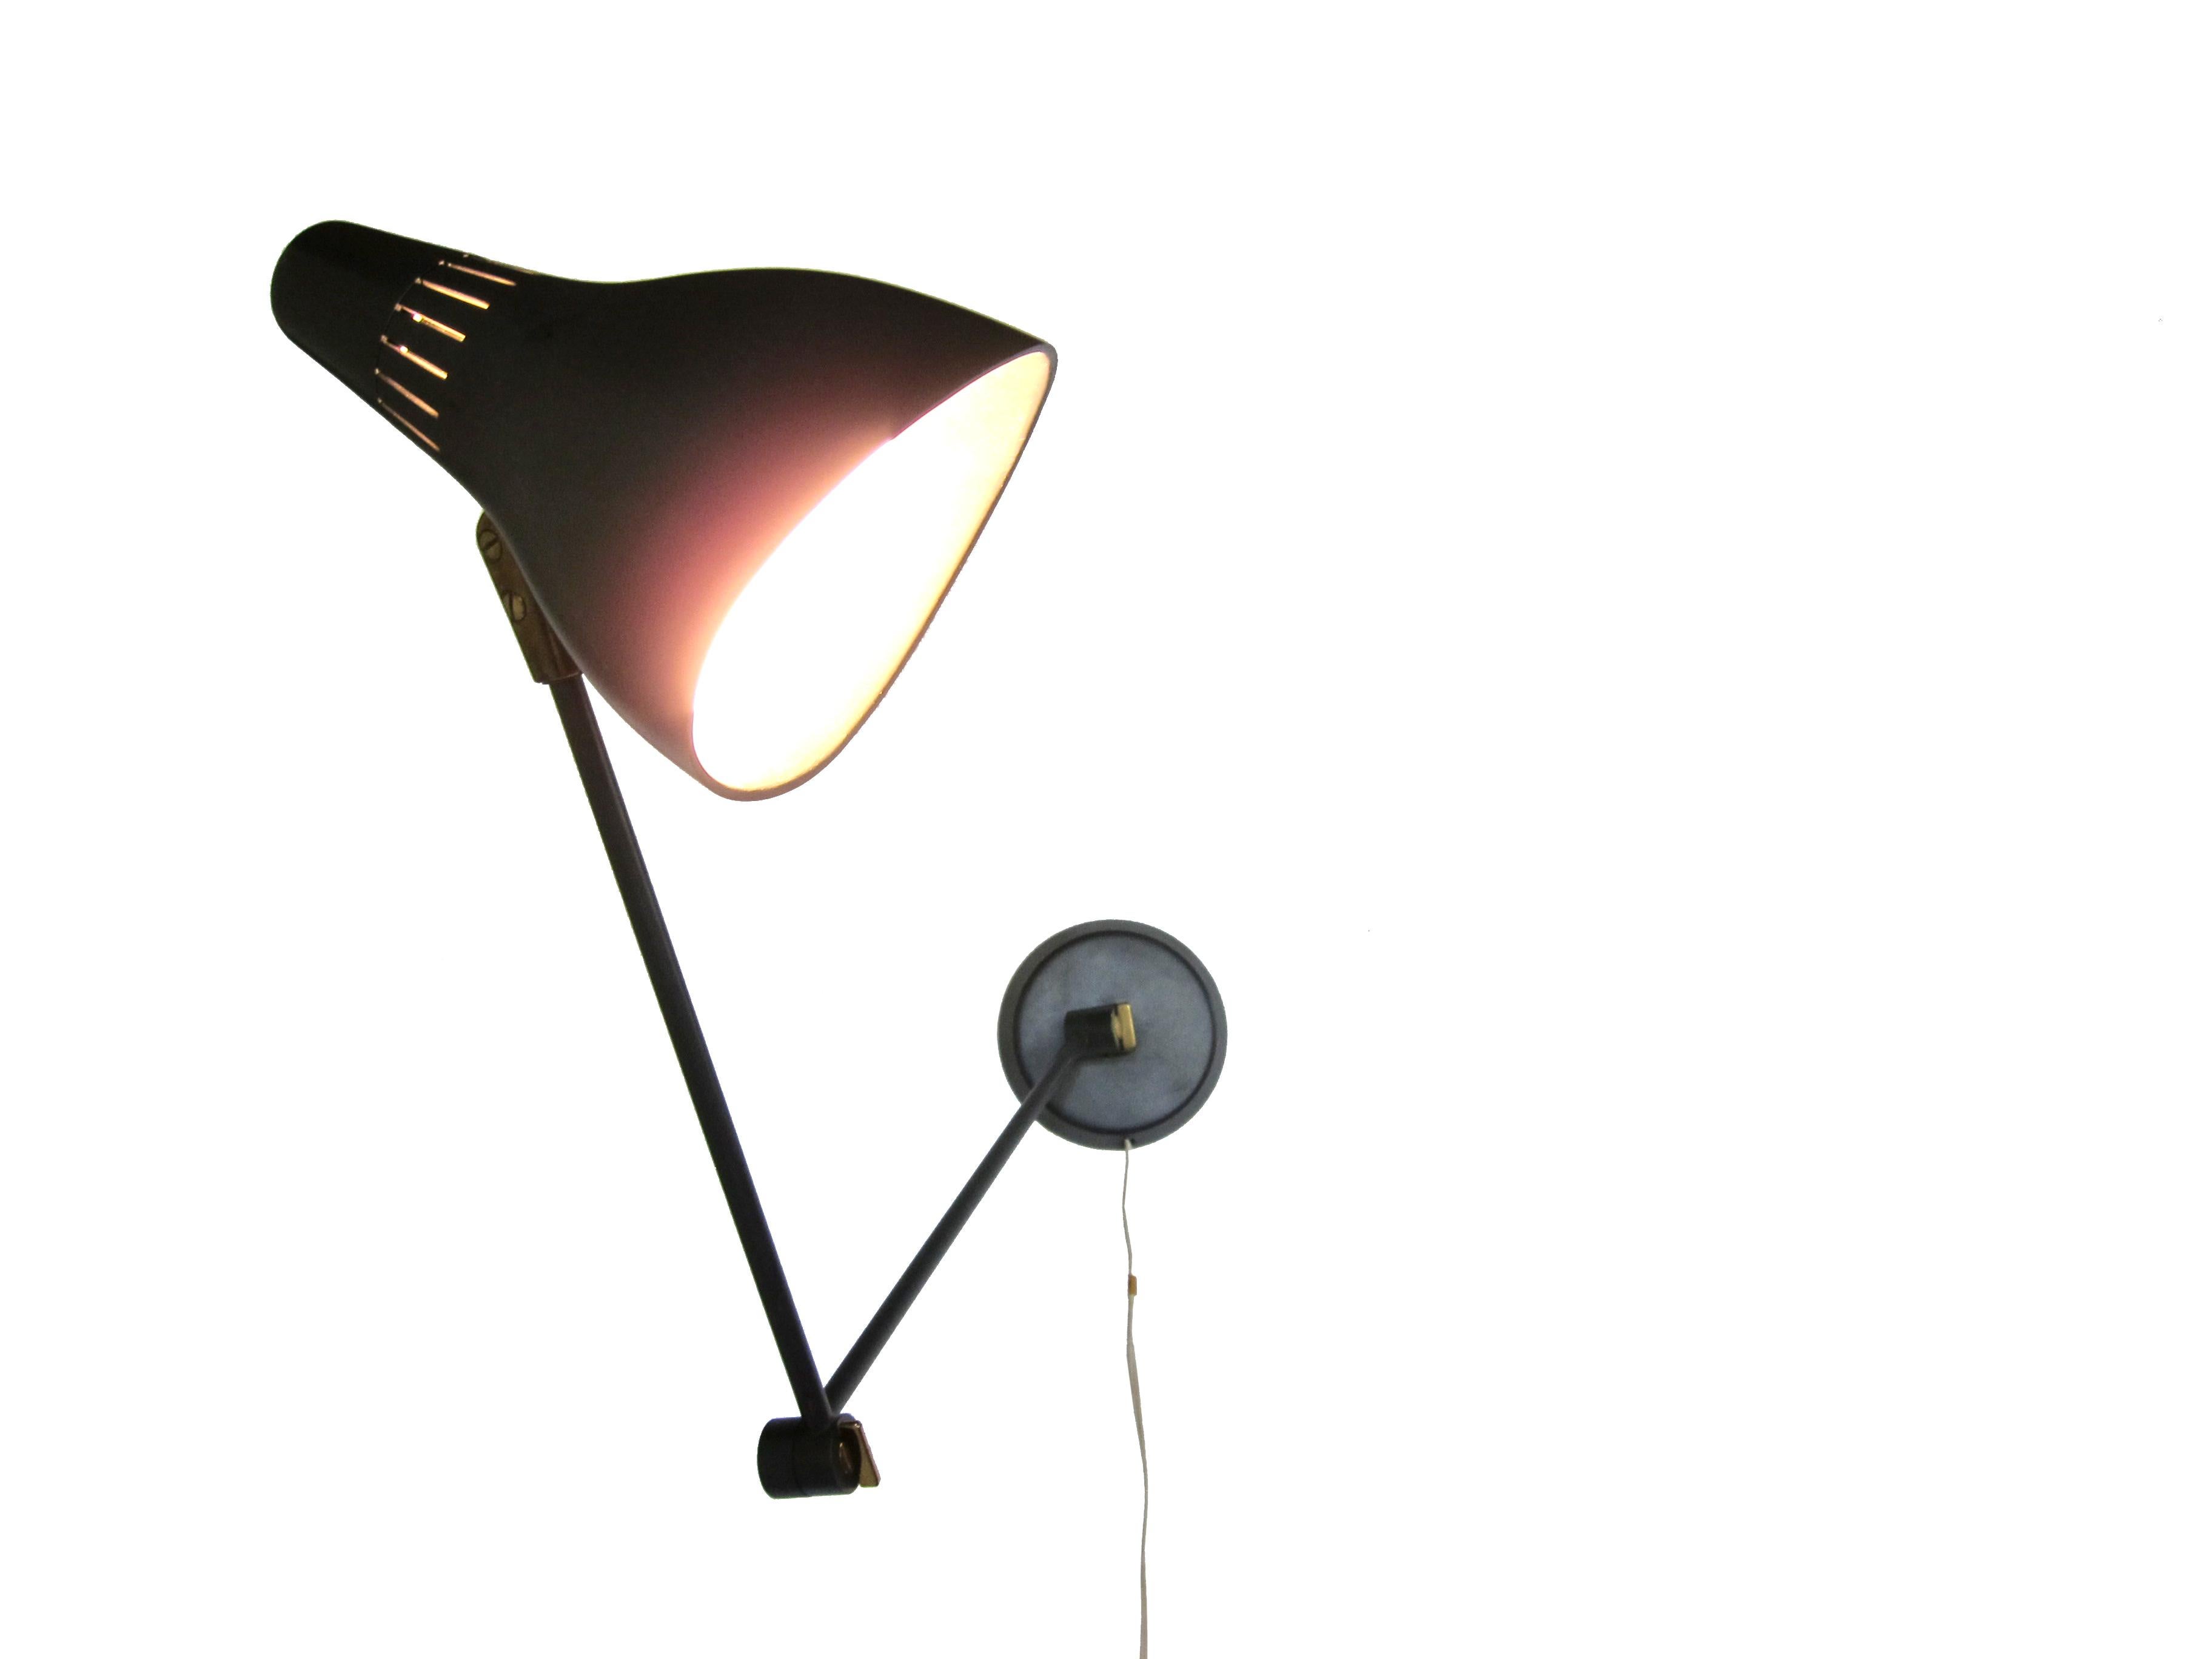 Metal extendable arm wall lamp with brass fittings designed by Gerald Thurston for Lightolier. Lamp head measures 8.5